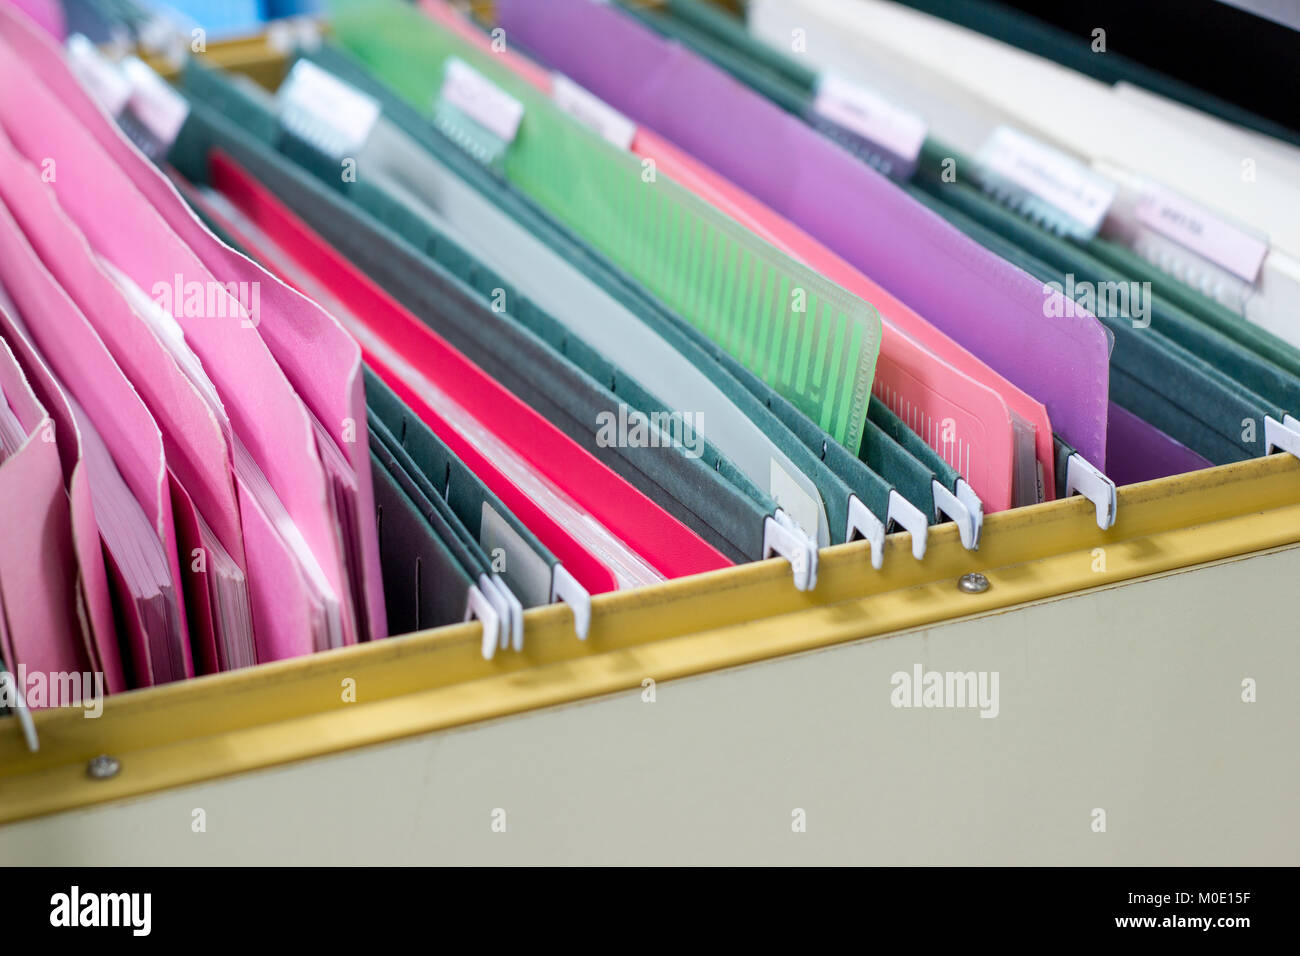 Files document of hanging file folders in a drawer in a whole pile of full papers, at work office Bangkok Thailand Business Concept Stock Photo